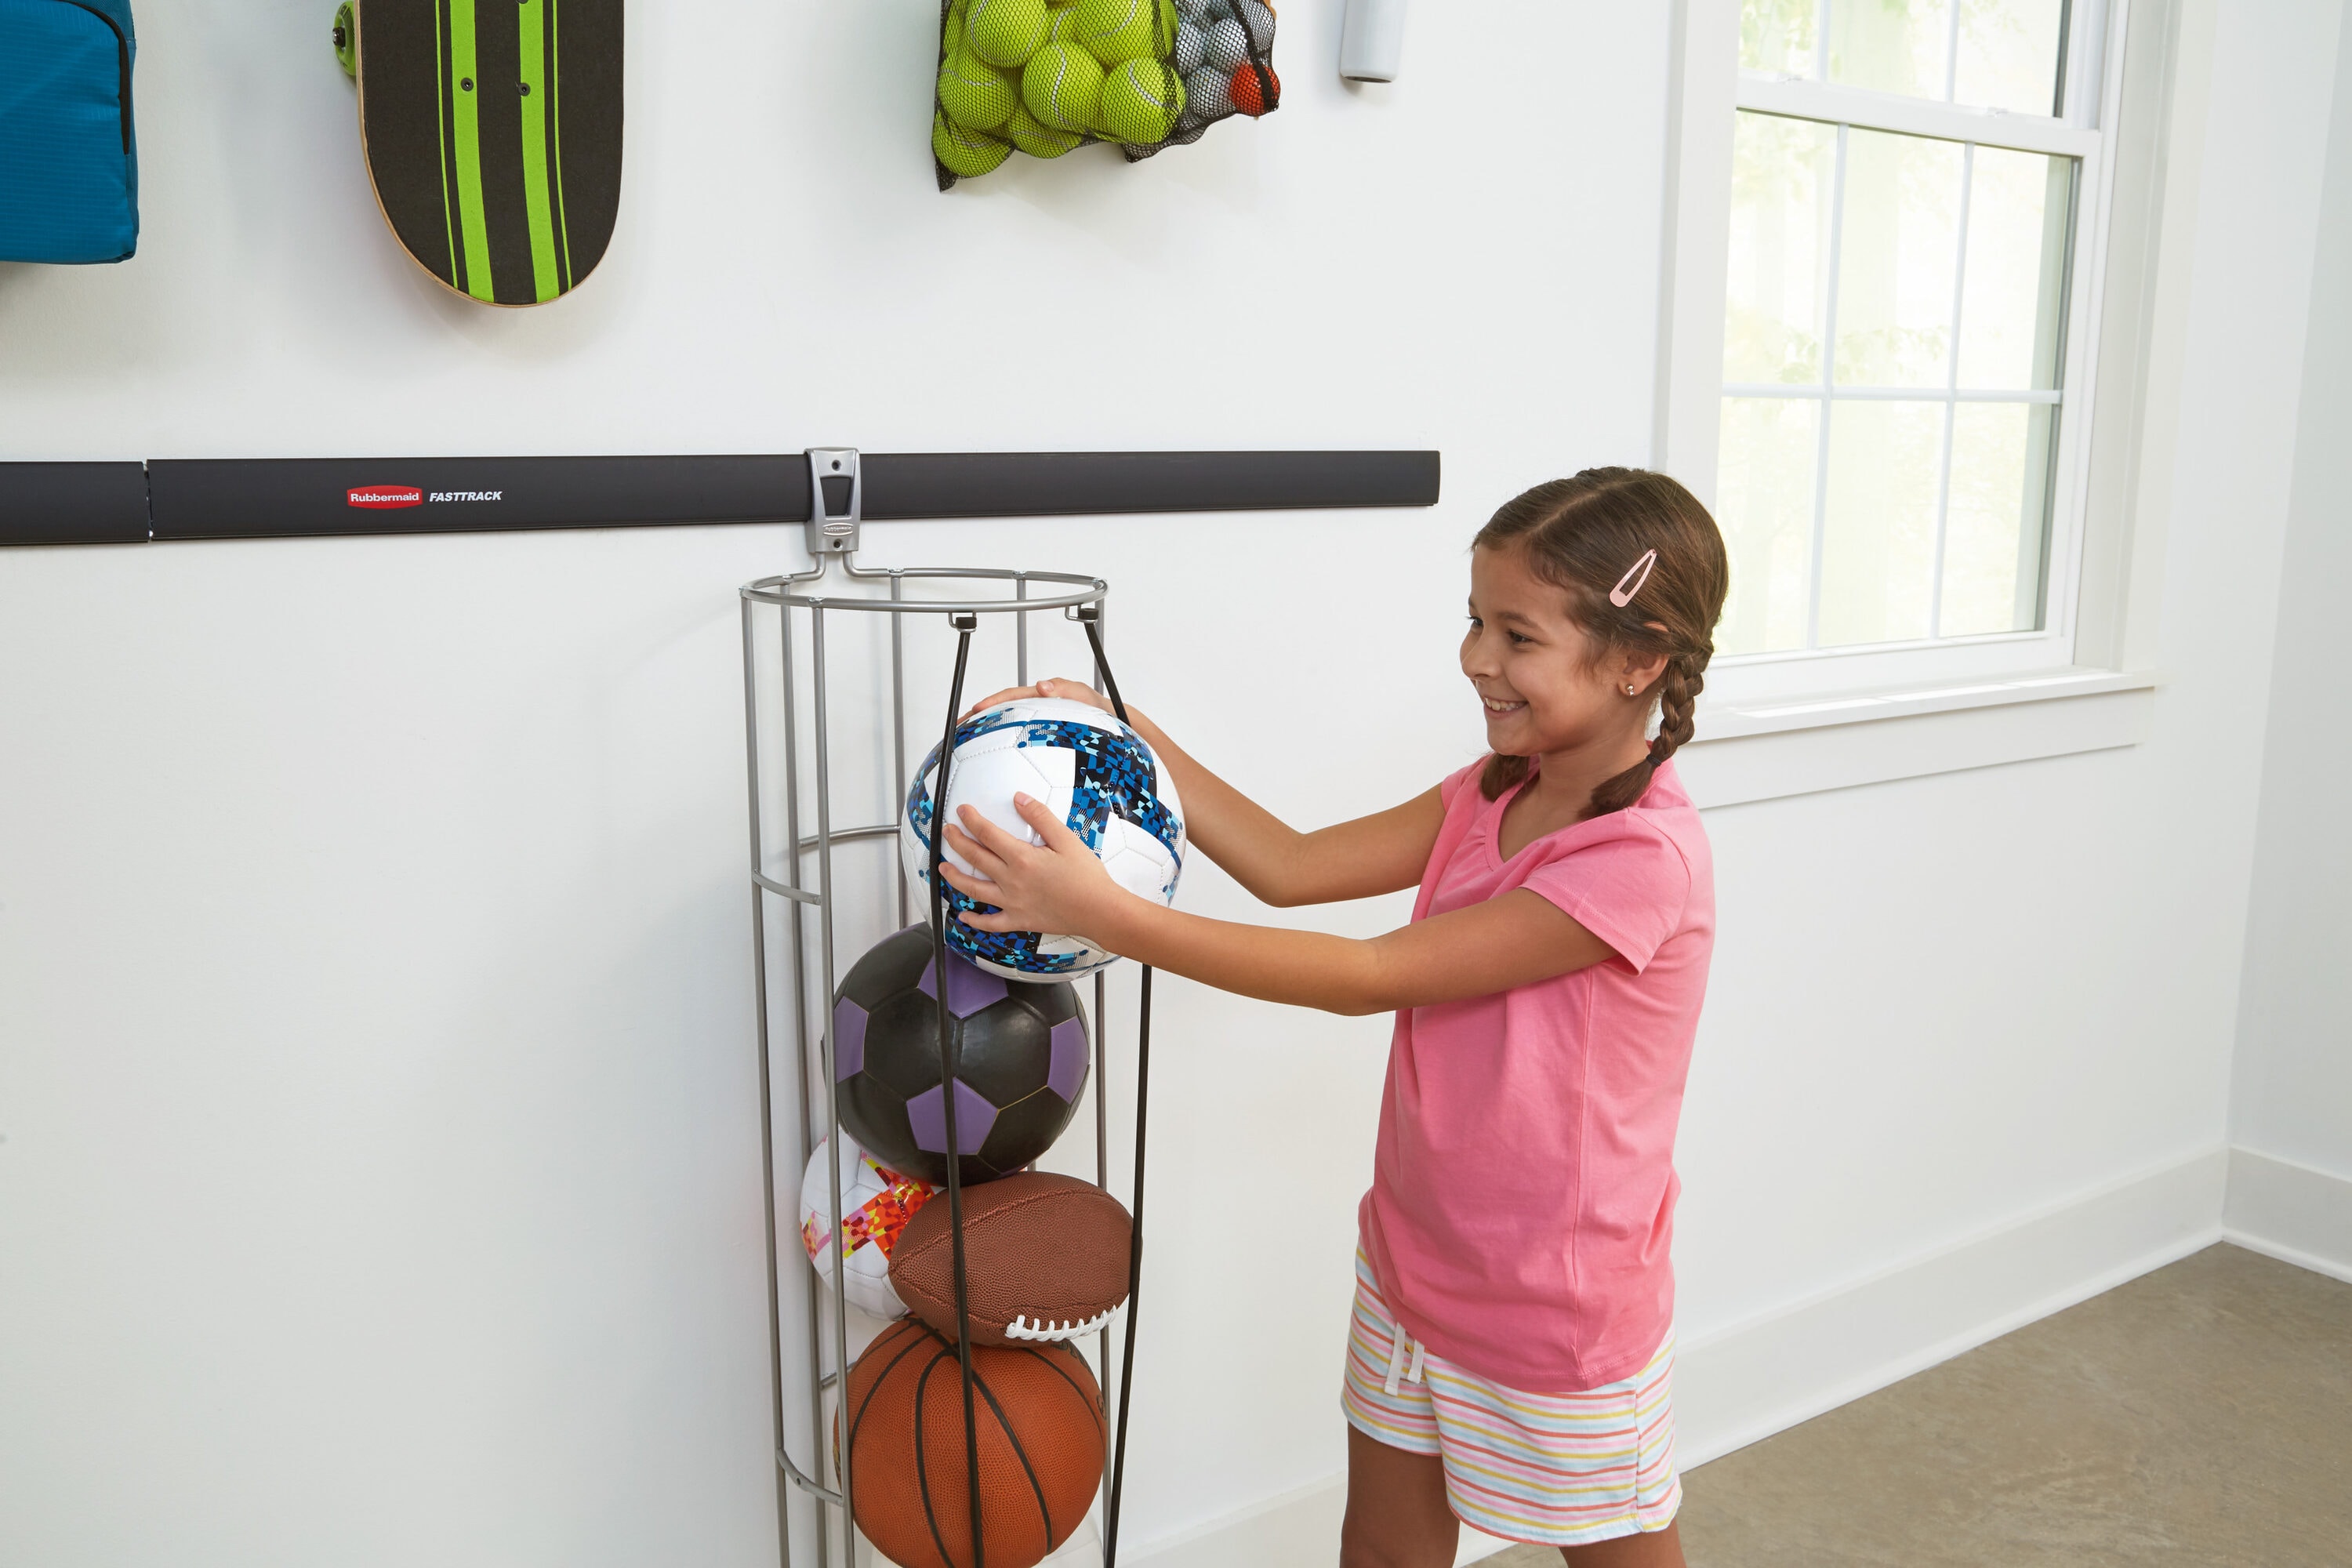 Rubbermaid Garage FastTrack Power Tool Holder, Wall Mounted Storage System, Holds Up to 50 Pounds